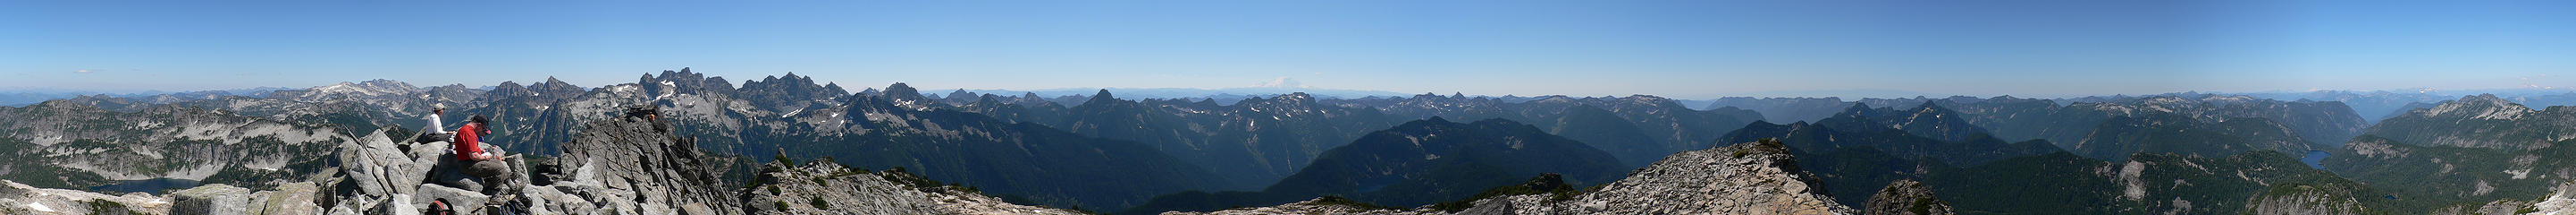 Panorama from Big Snow Mtn. 8.13.06.